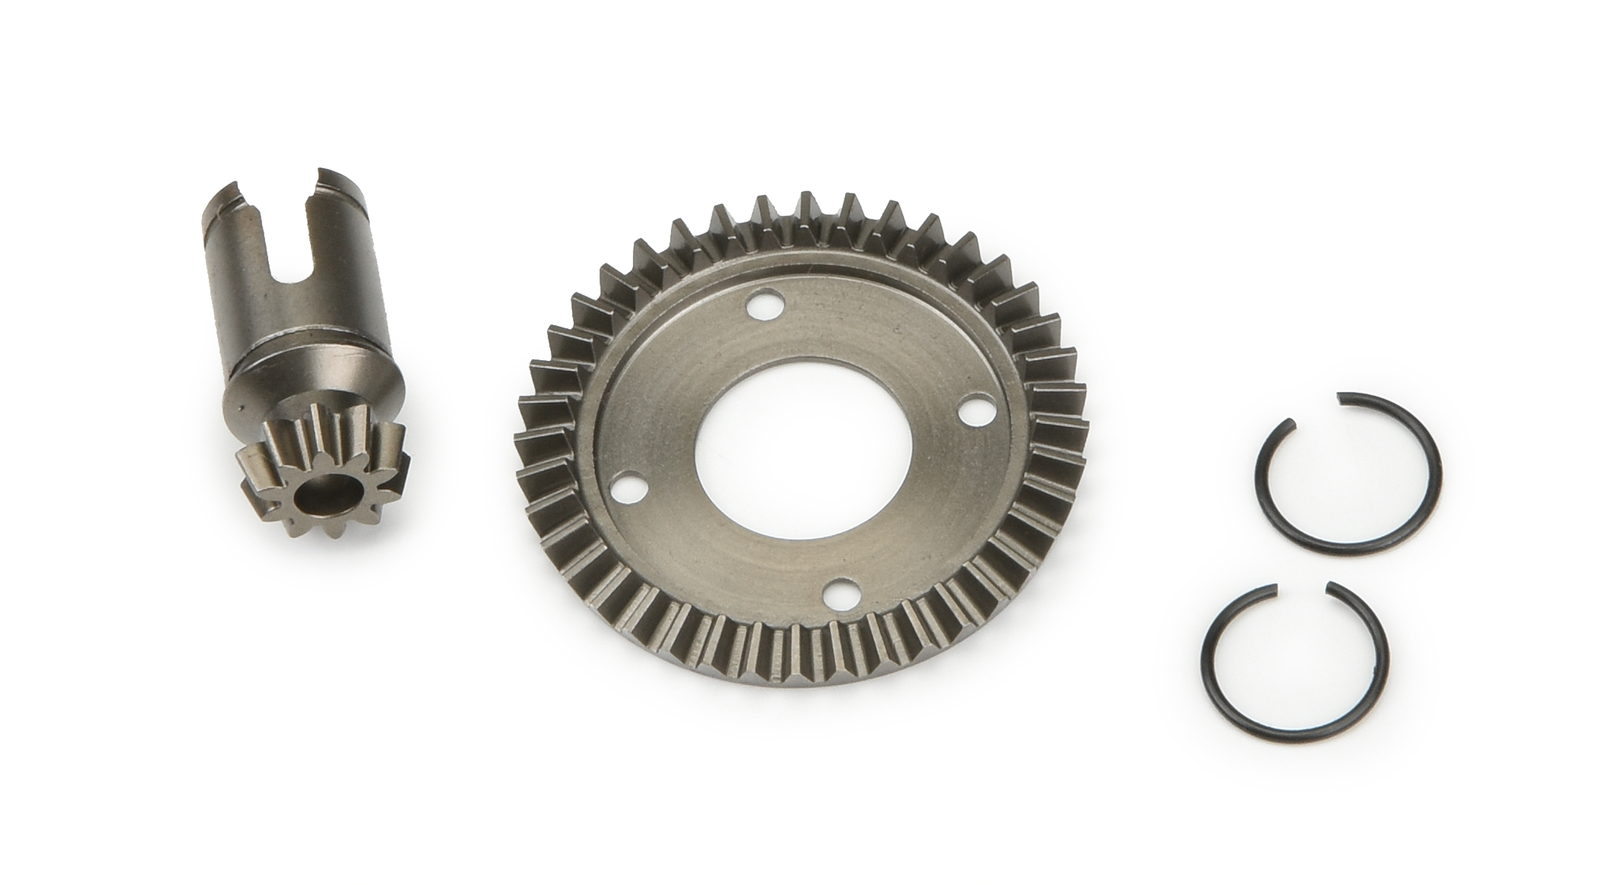 PRO-MT 4X4 REPLACEMENT RING AND PINION GEARS - PR4005-08